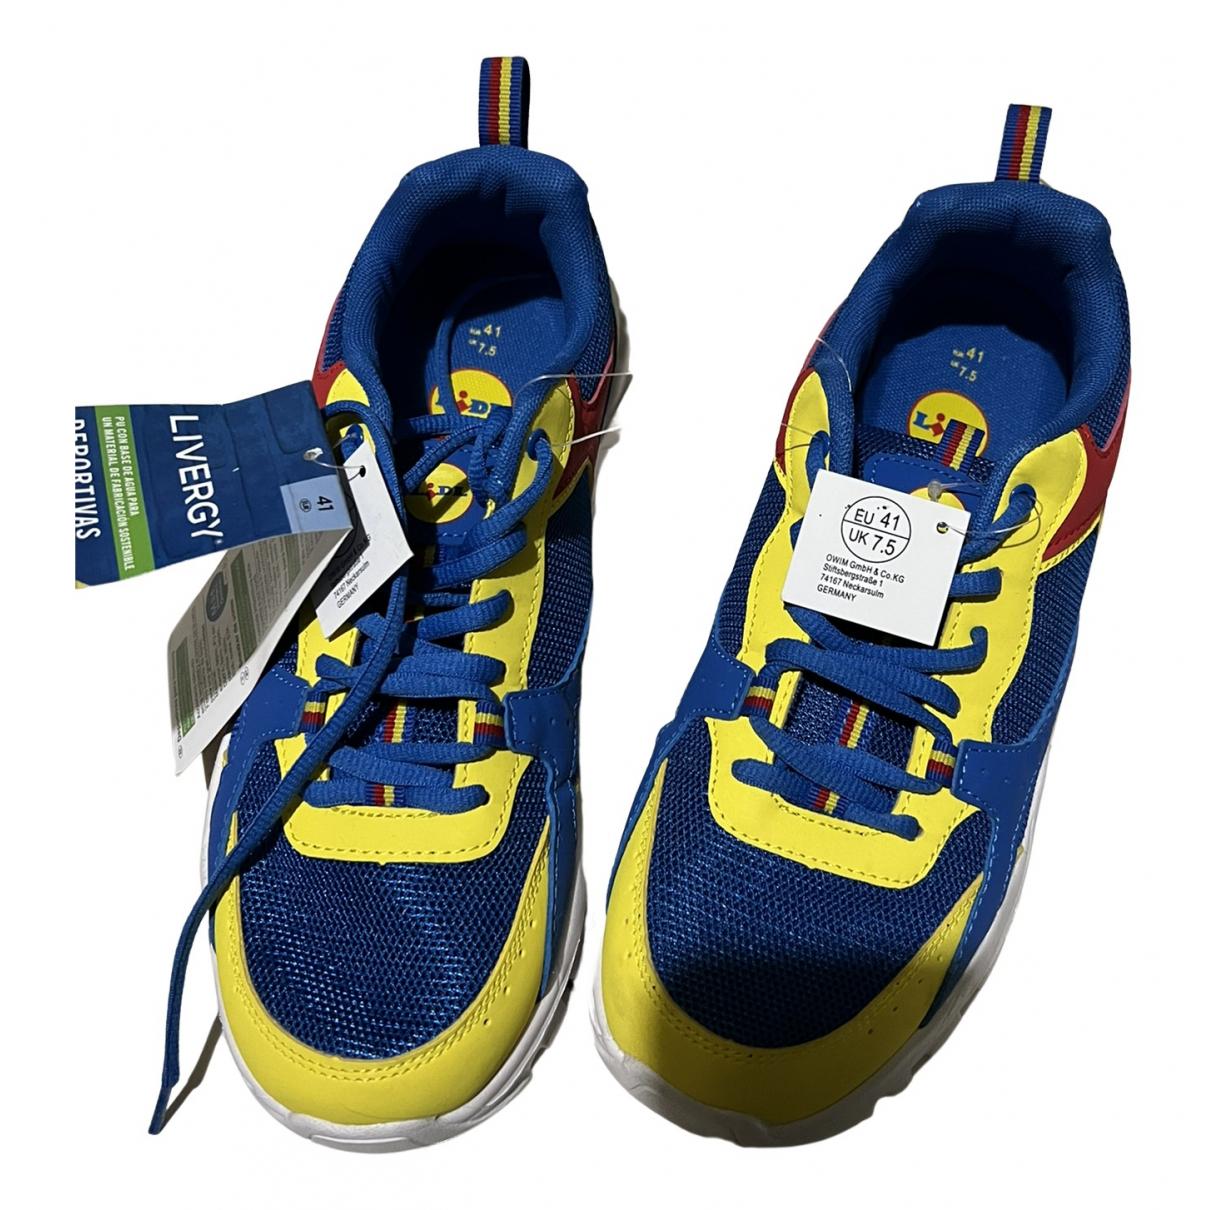 Trainers Lidl Blue size 41 EU in Rubber - 23209753